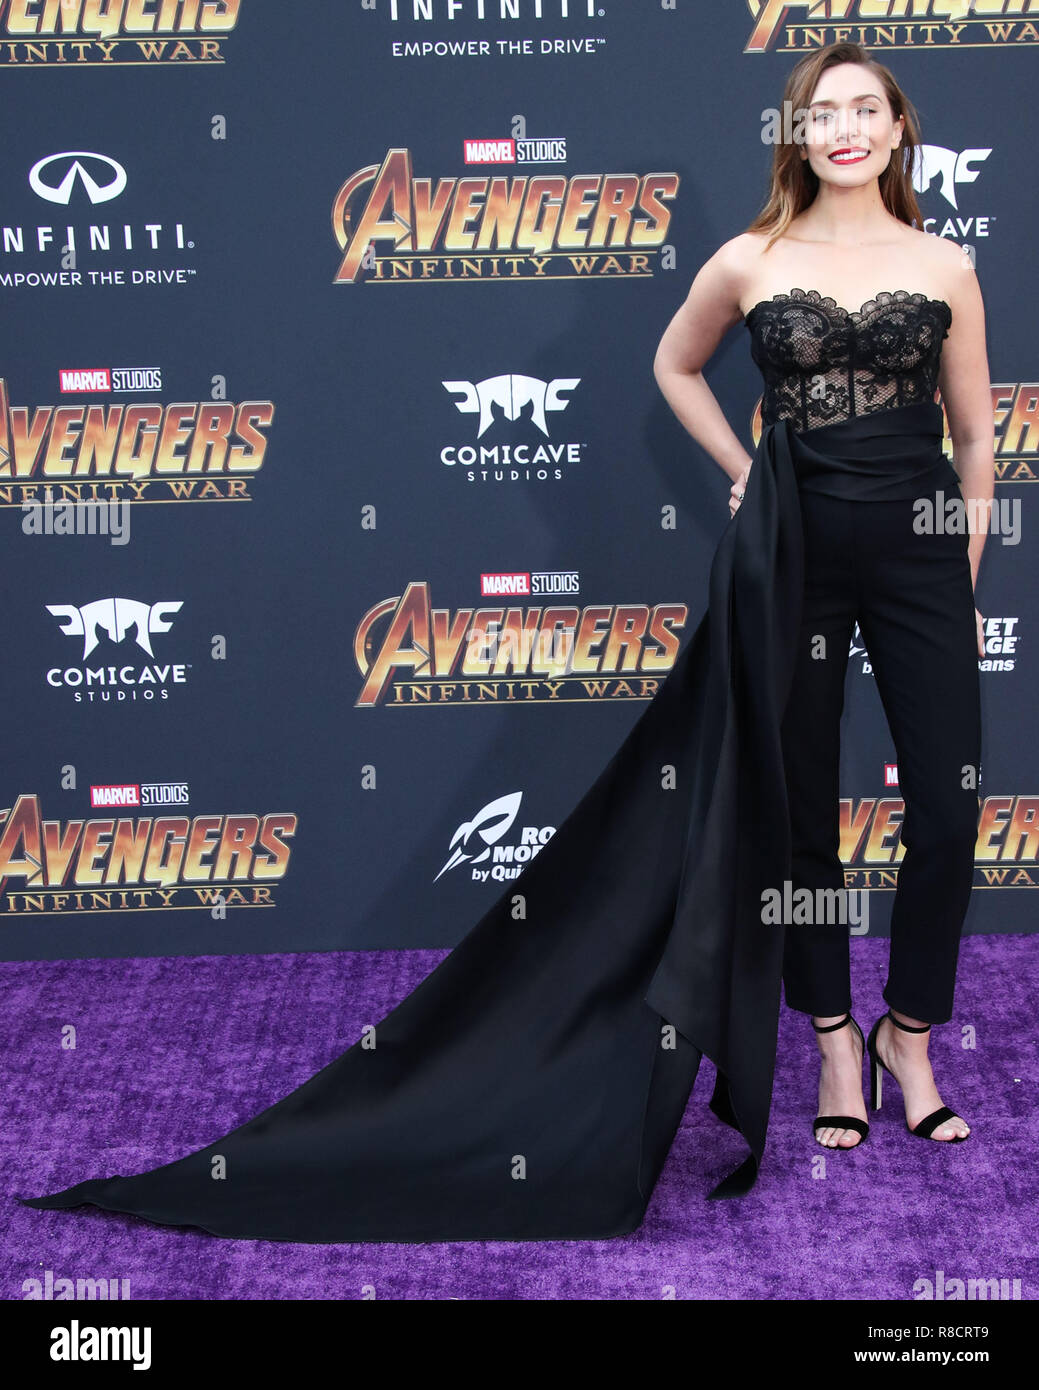 HOLLYWOOD, LOS ANGELES, CA, USA - APRIL 23: Elizabeth Olsen at the World Premiere Of Disney And Marvel's 'Avengers: Infinity War' held at the El Capitan Theatre, Dolby Theatre and TCL Chinese Theatre IMAX on April 23, 2018 in Hollywood, Los Angeles, California, United States. (Photo by Xavier Collin/Image Press Agency) Stock Photo